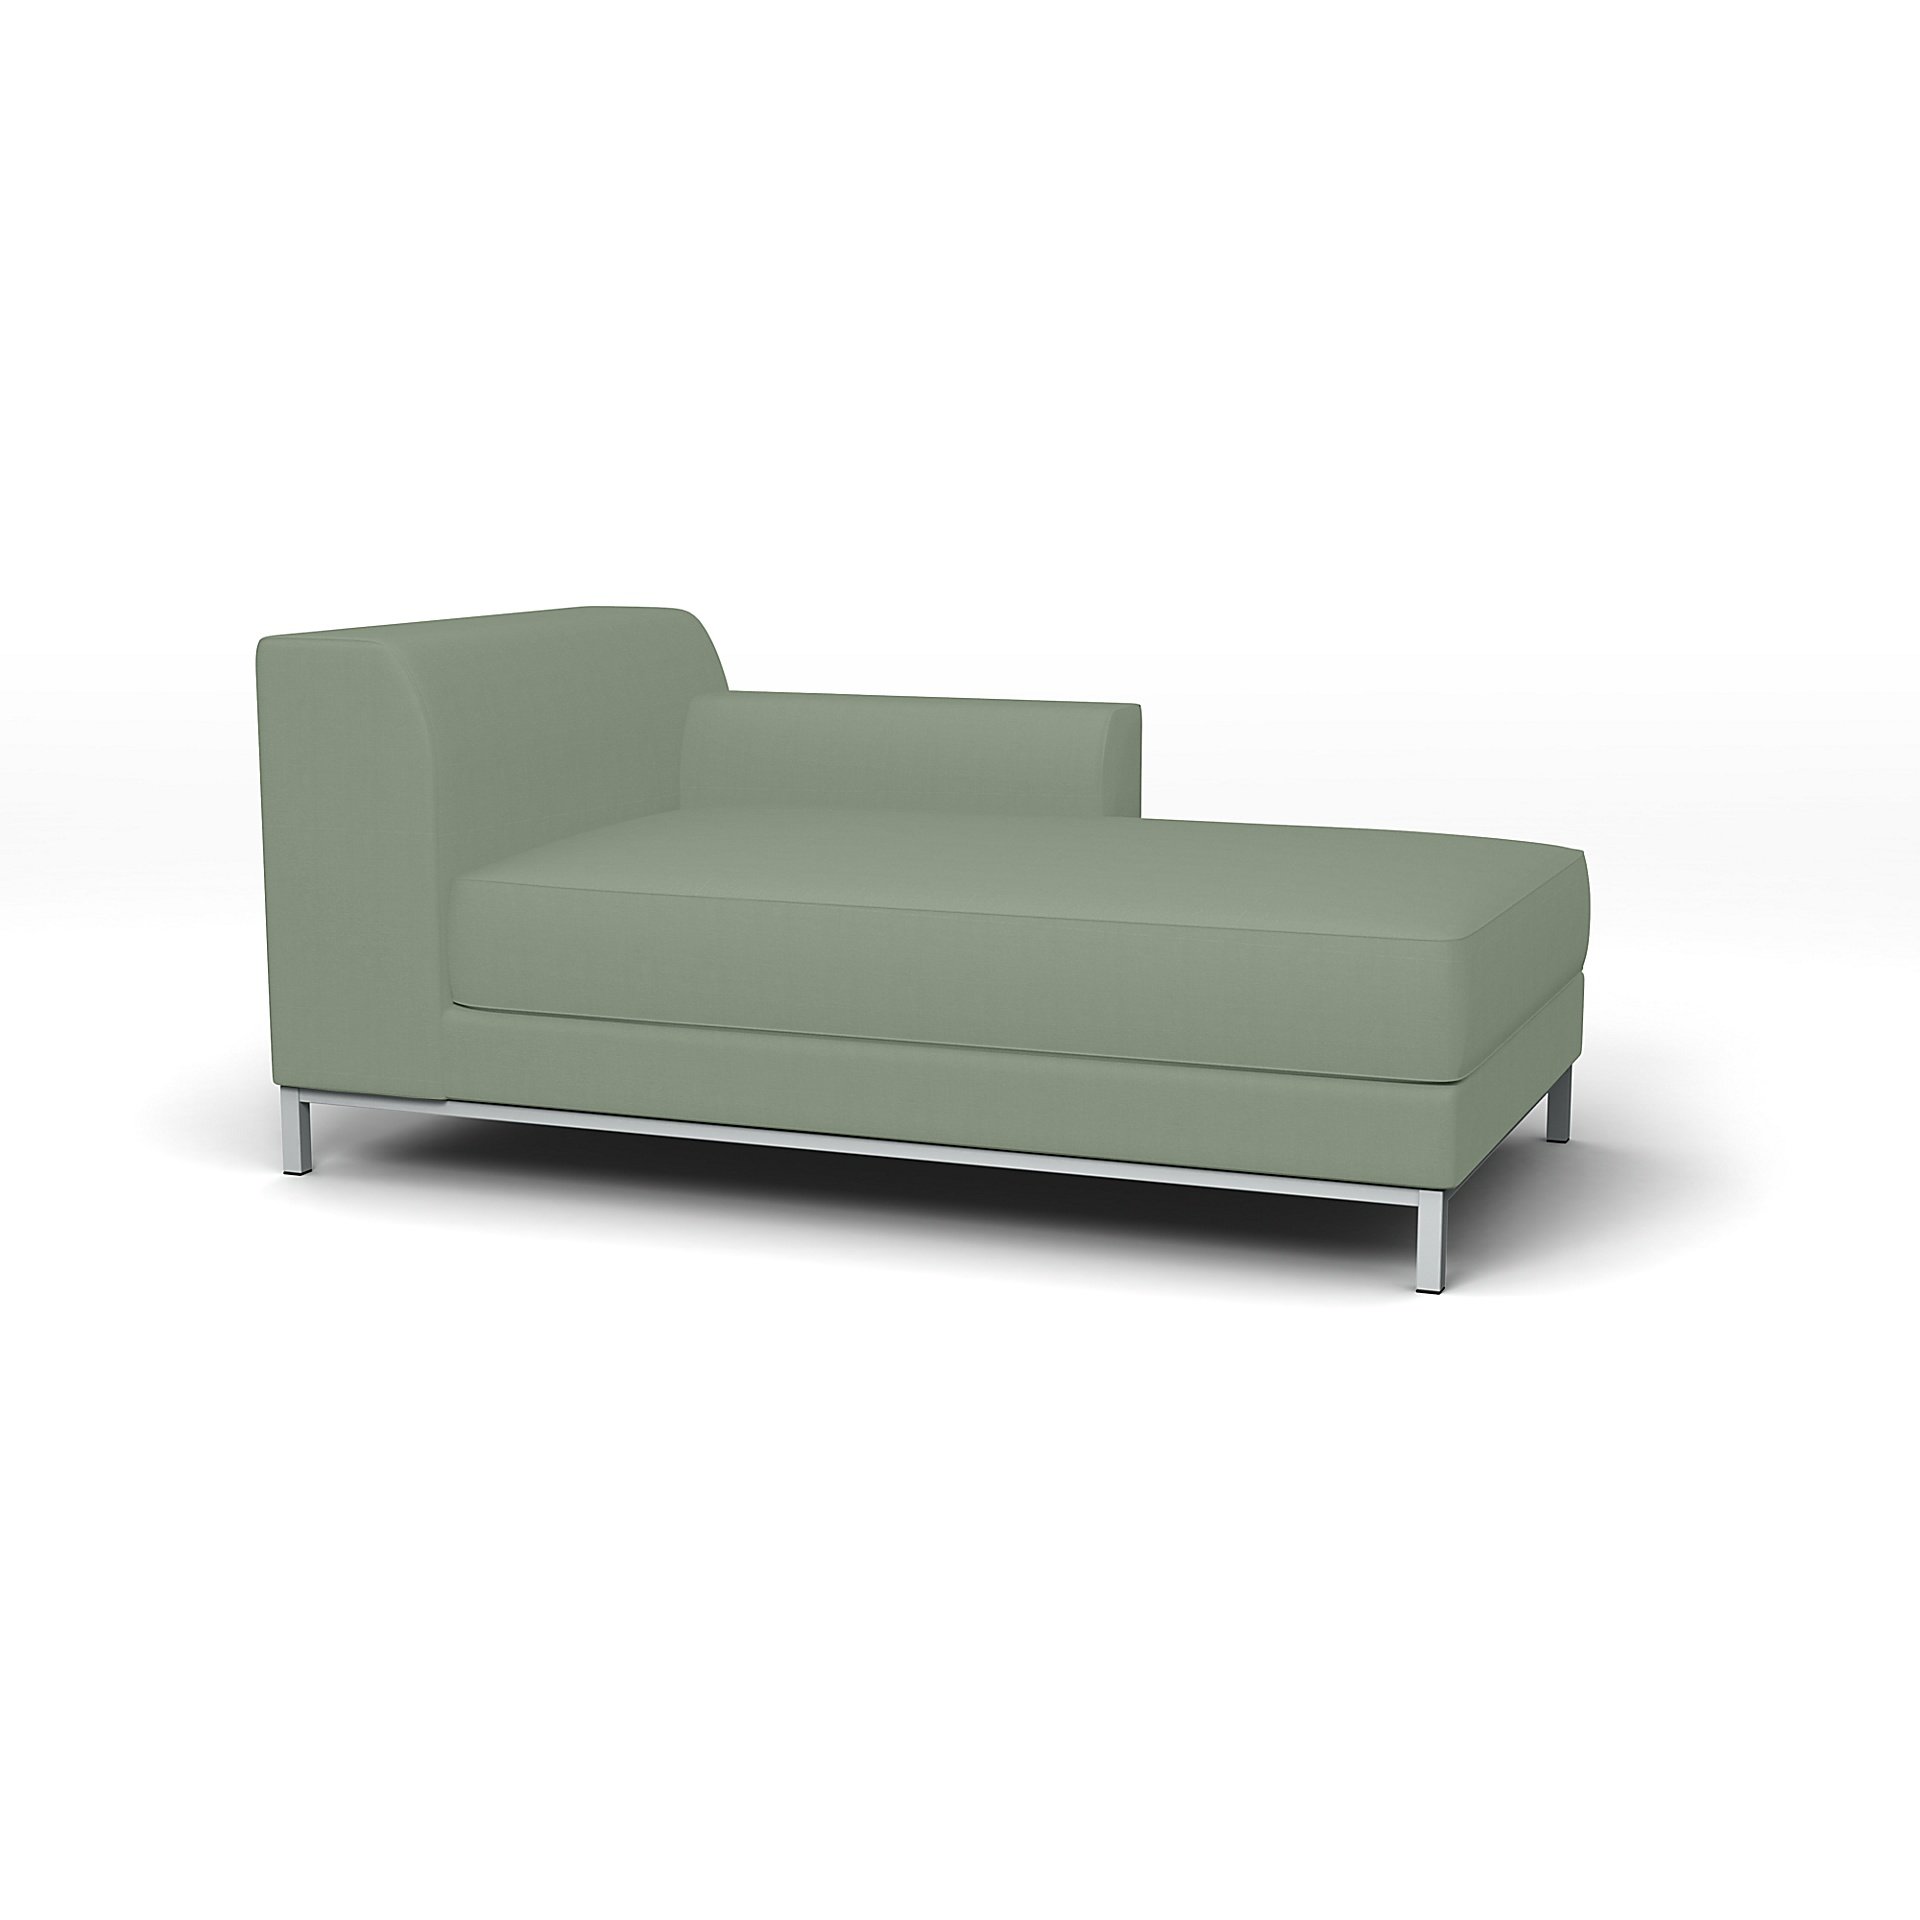 IKEA - Kramfors Chaise Longue with Right Arm Cover, Seagrass, Cotton - Bemz